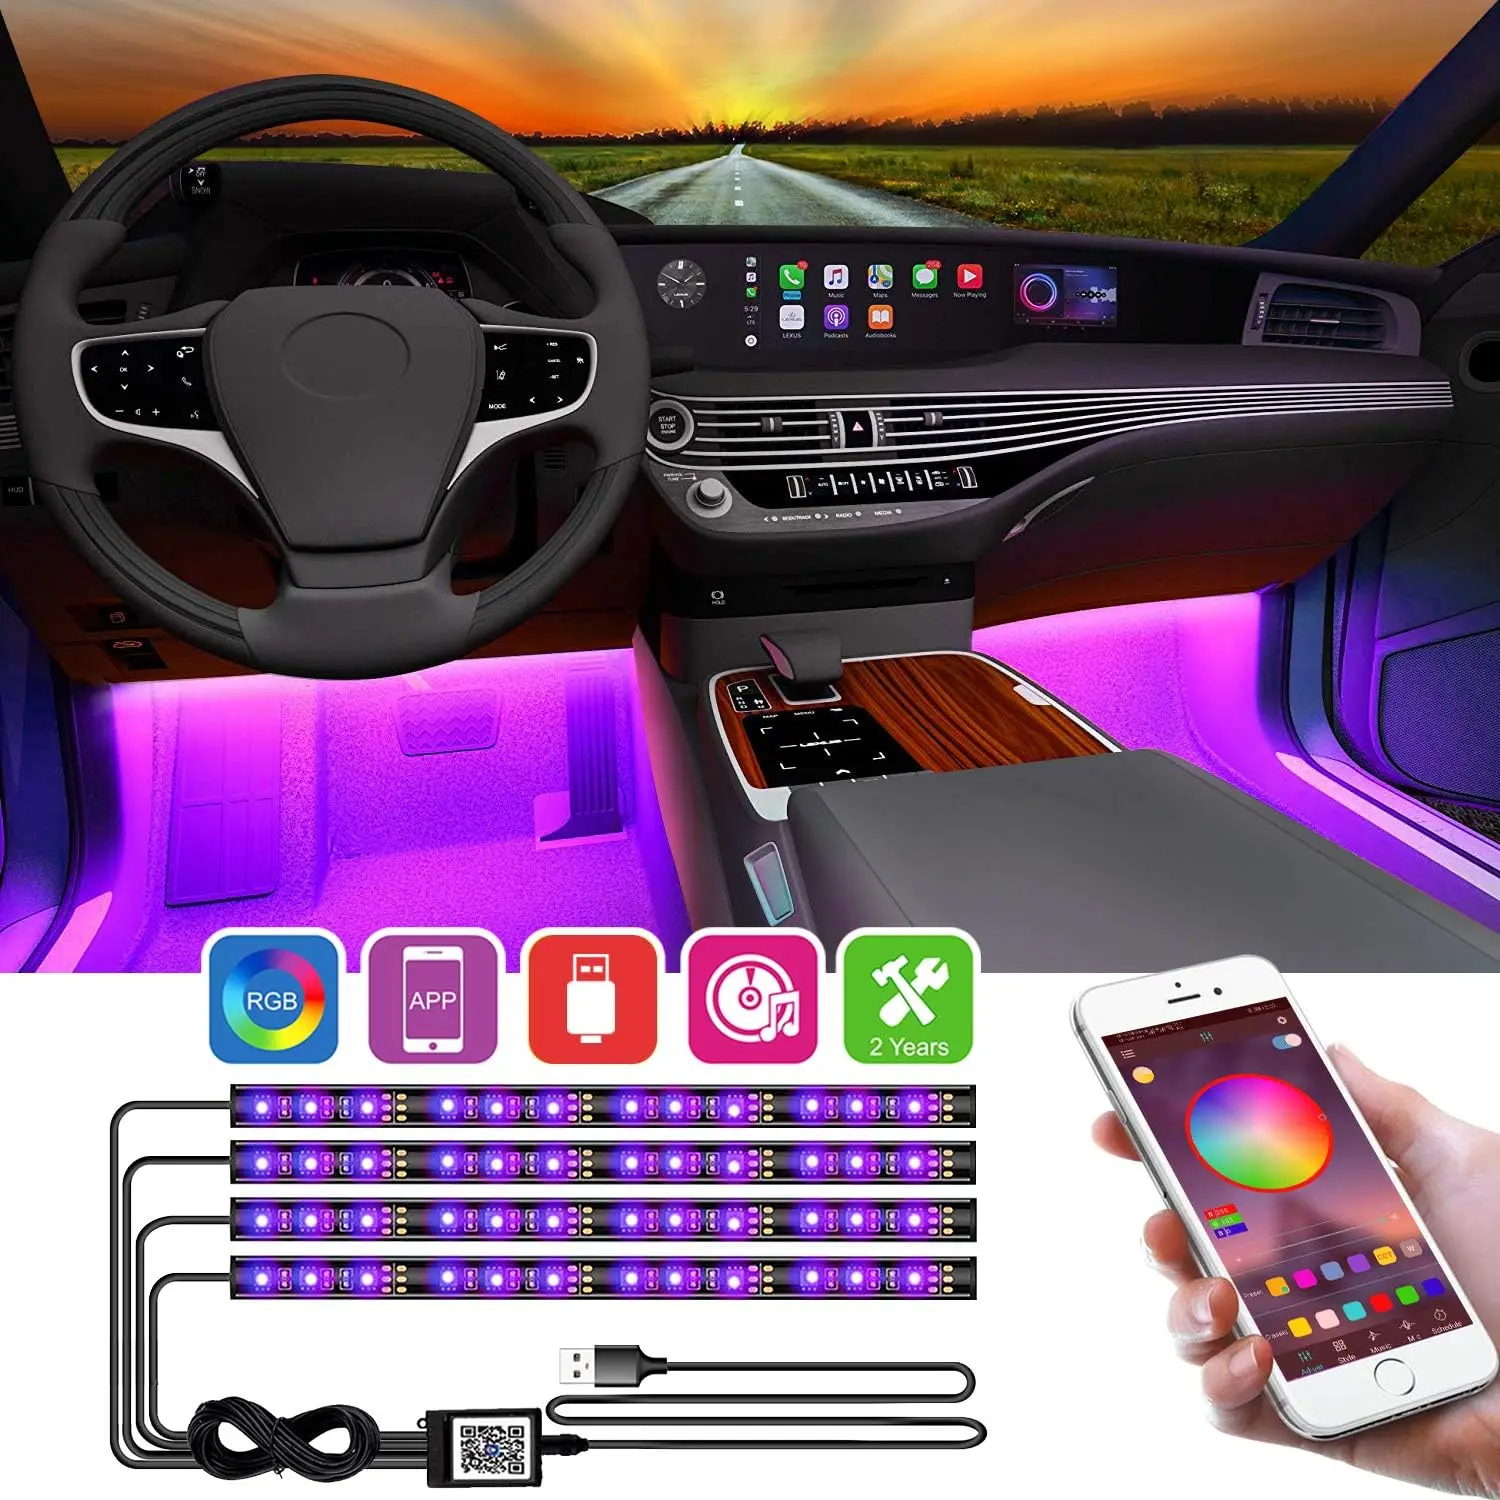 

Car LED Interior Atmosphere Lighting Car RGB Strips Waterproof Flexible Neon DIY USB Lamp APP Remote Control for Auto Decoration